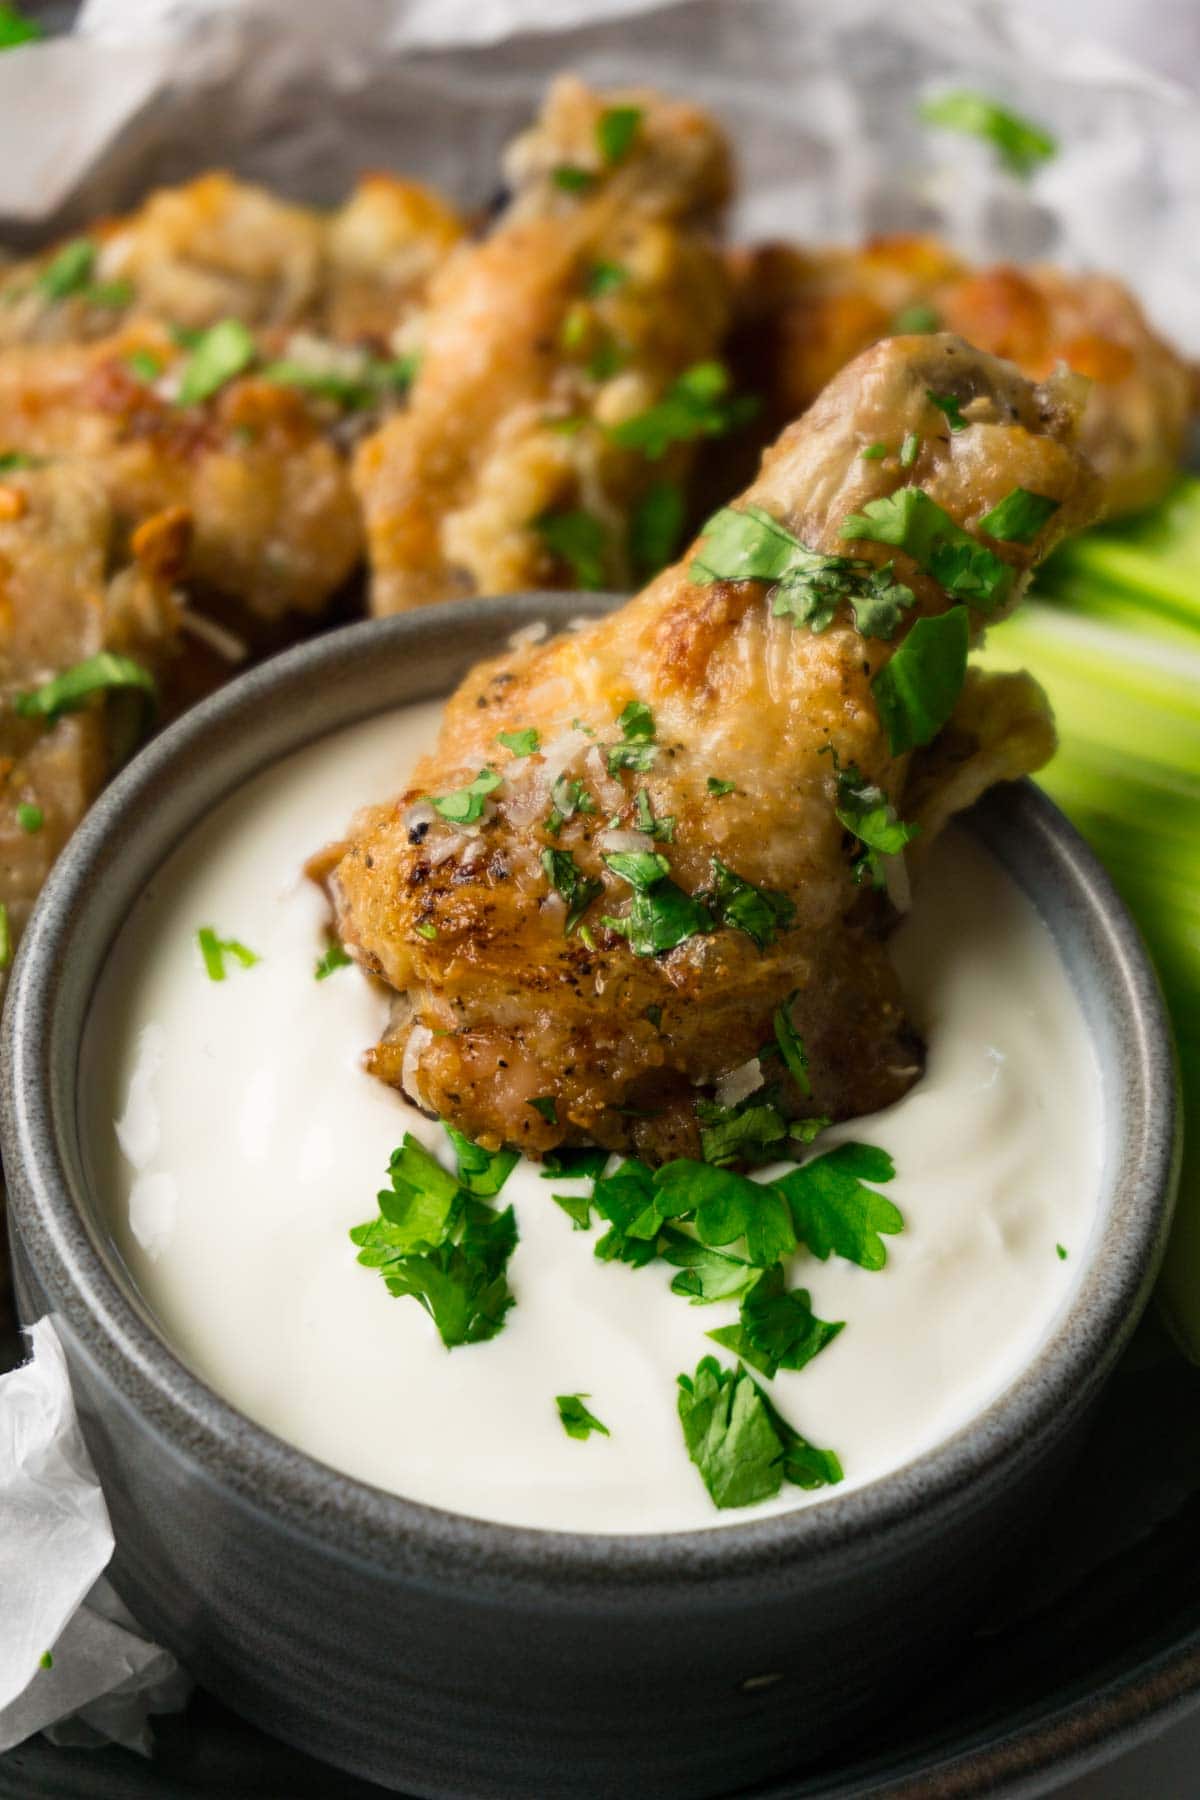 Baked chicken drumette garnished with chopped cilantro in a bowl with creamy dipping sauce, more wings and drumettes on the background.